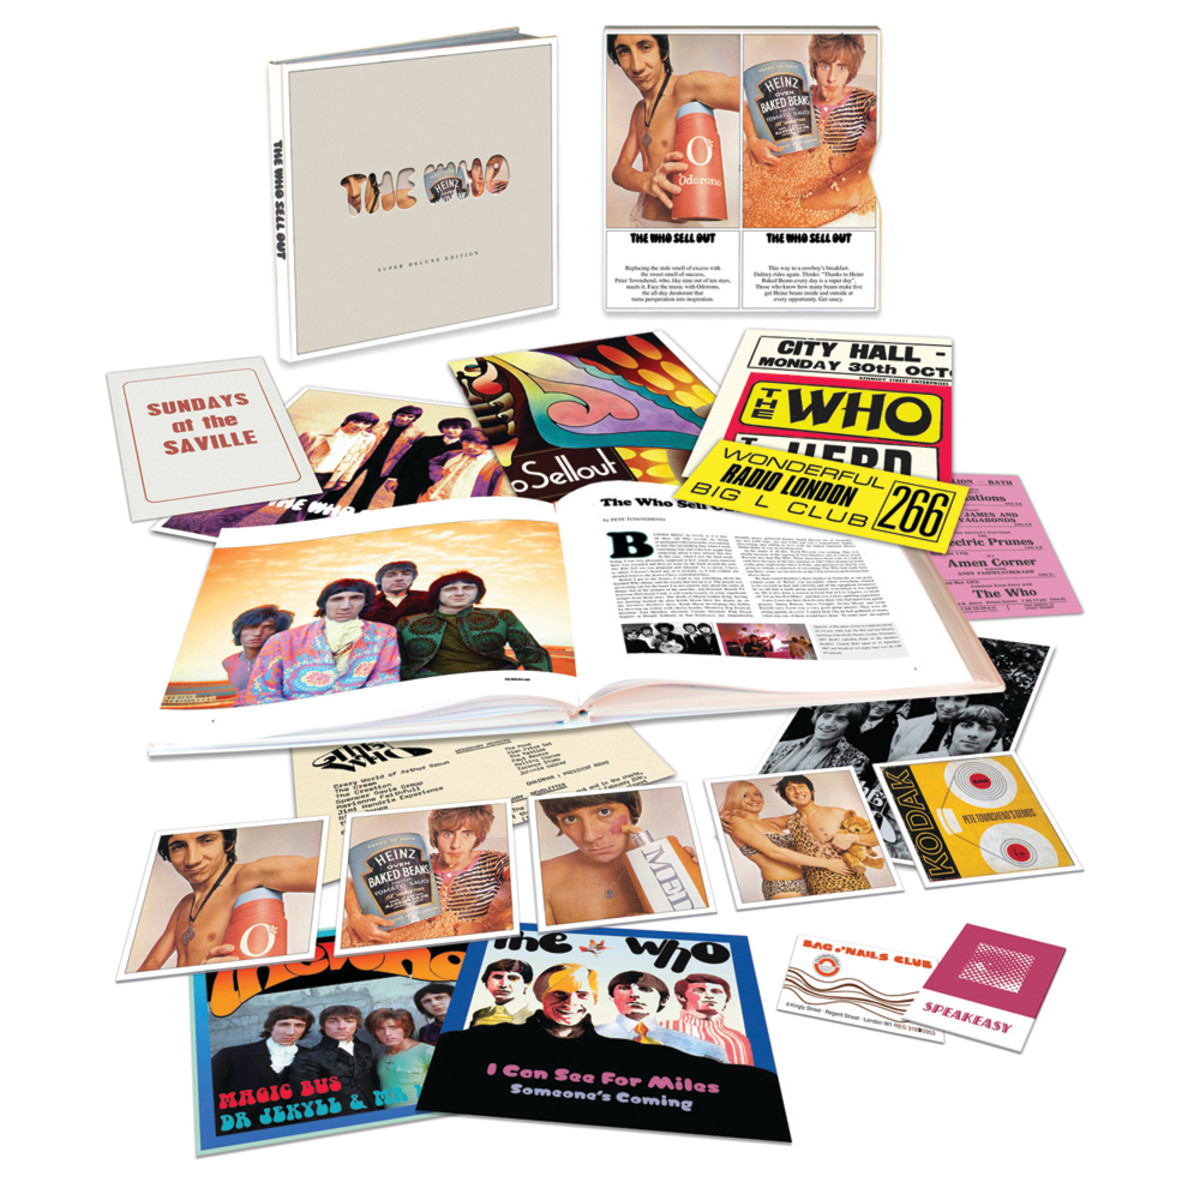 The Who Sell Out super deluxe edition comes as advertised, as one of the most complete box sets to be released in 2021. The reissue also comes in other less elaborate formats.